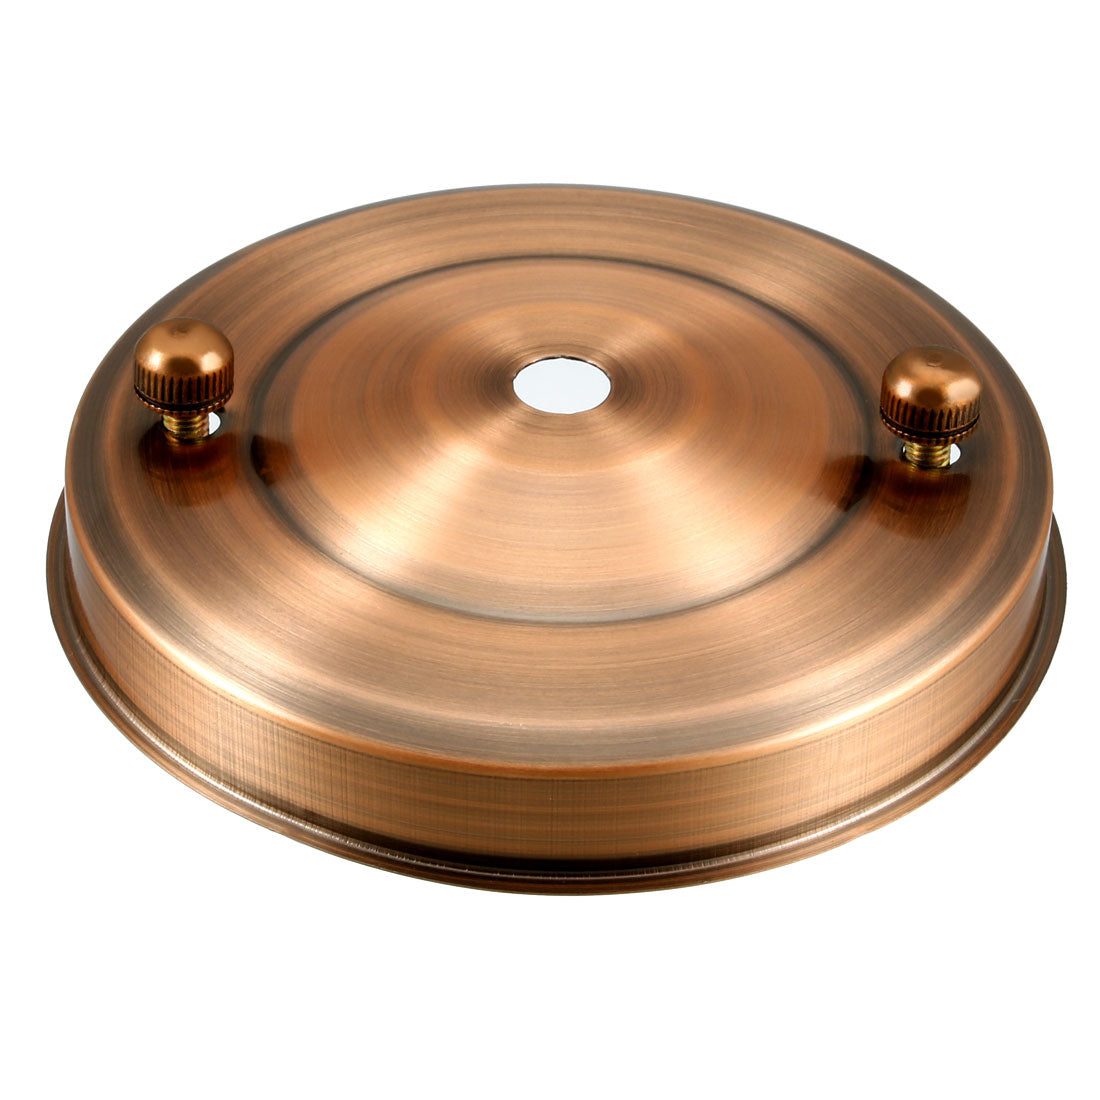 uxcell Uxcell Retro Ceiling Light Plate Pointed Base Chassis Disc Pendant Accessories 105mmx23mm Copper Tone w Screw